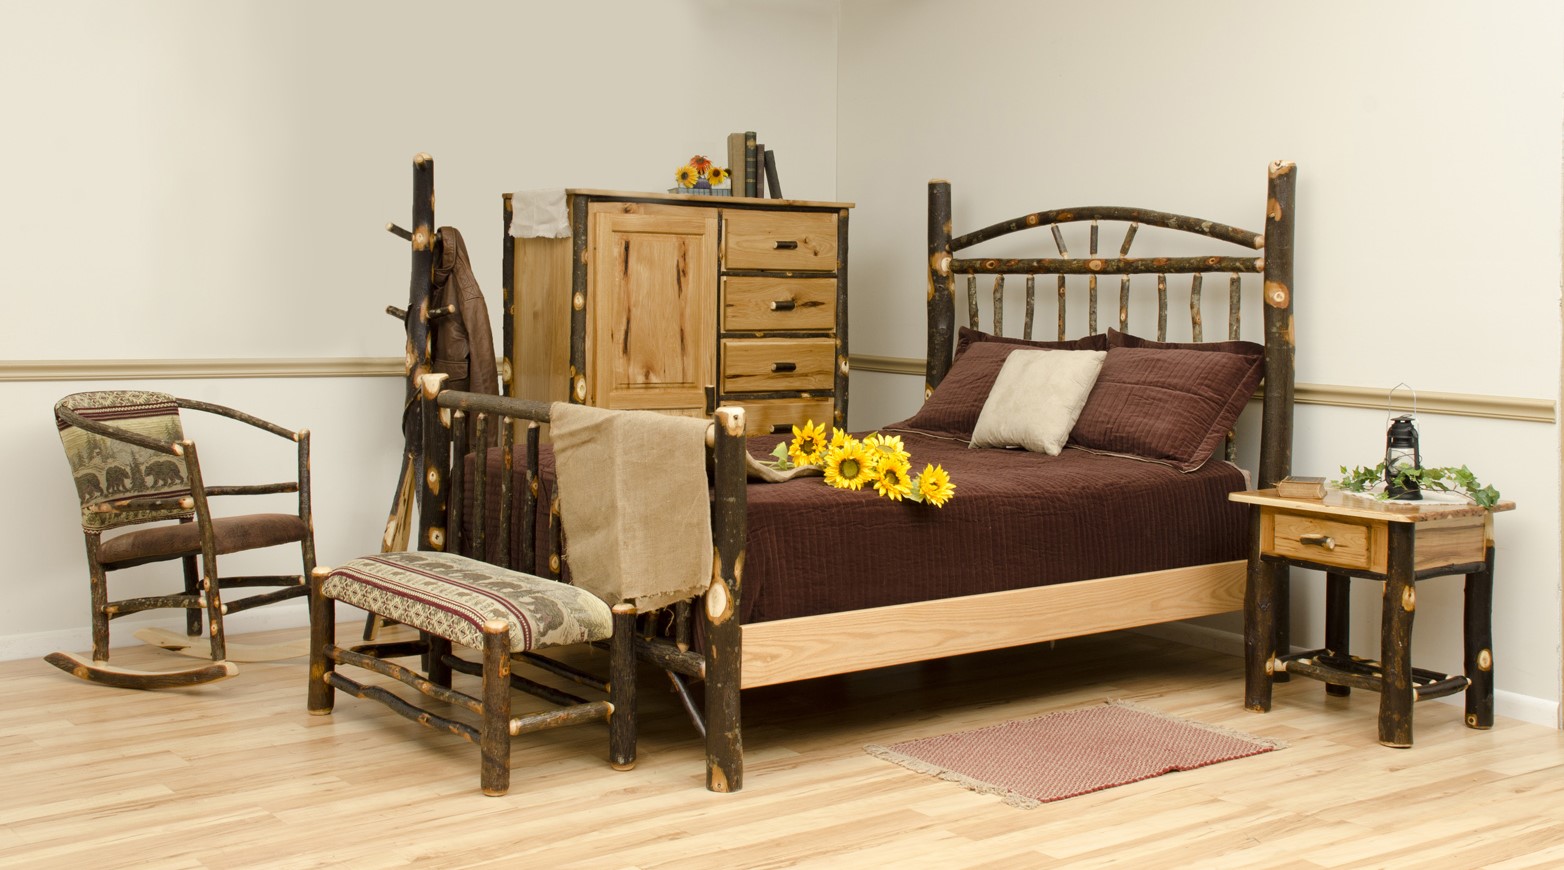 Hickory Collection Bedroom Set with a rocking chair, padded bench, dresser, and nightstand